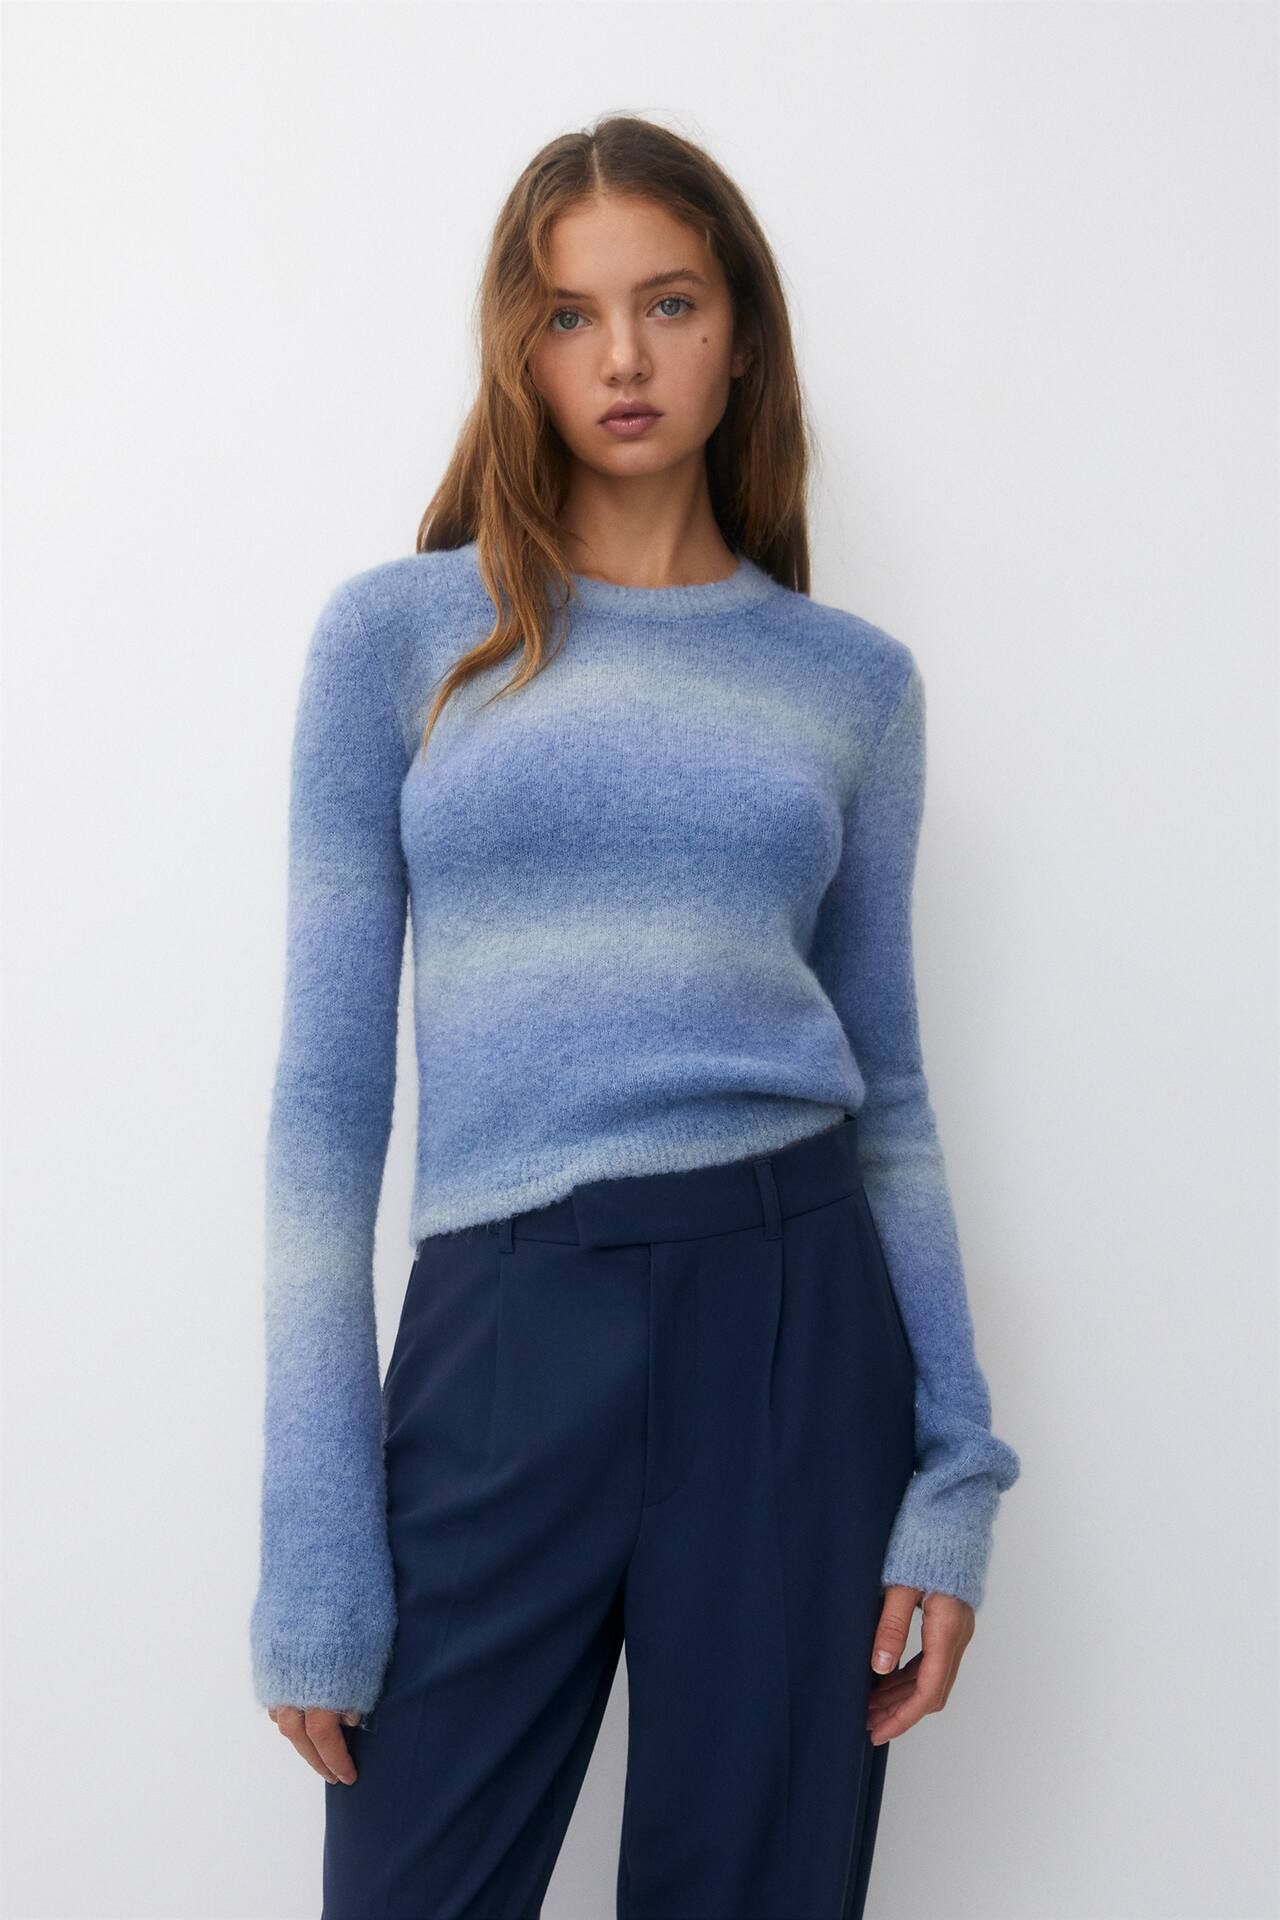 Ombré knit jumper | PULL and BEAR UK